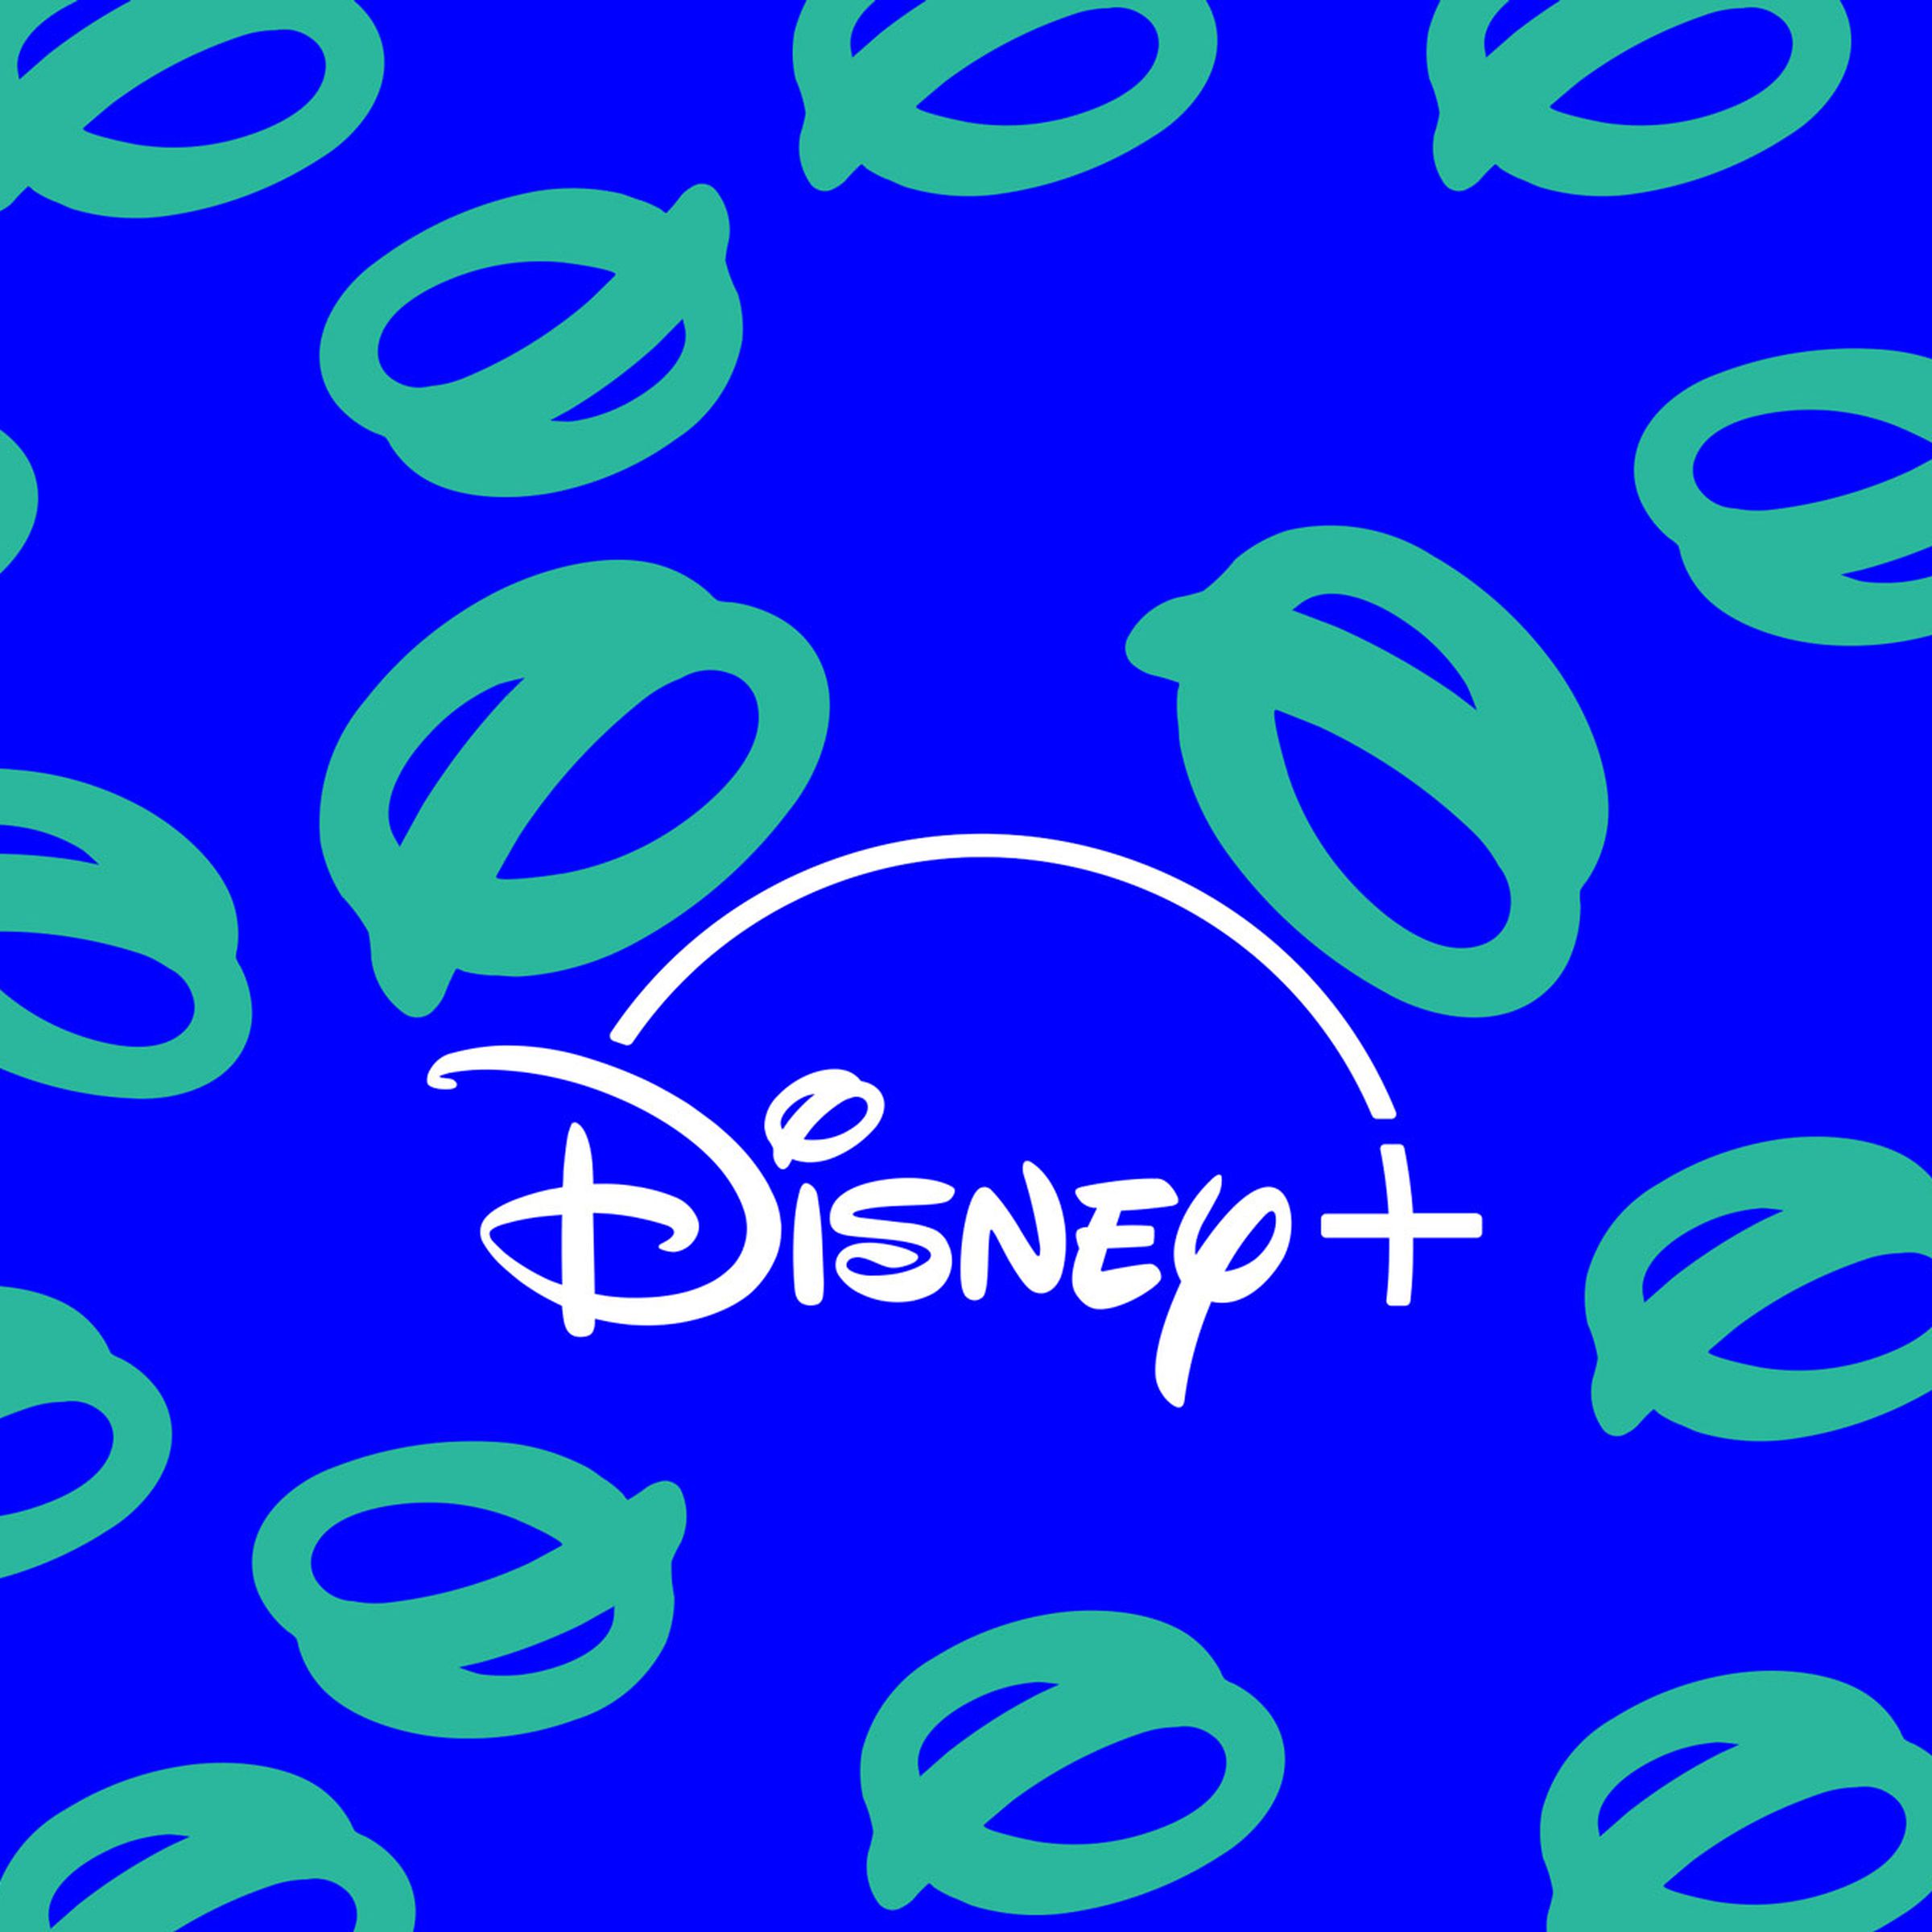 An image showing the Disney Plus logo on a blue background